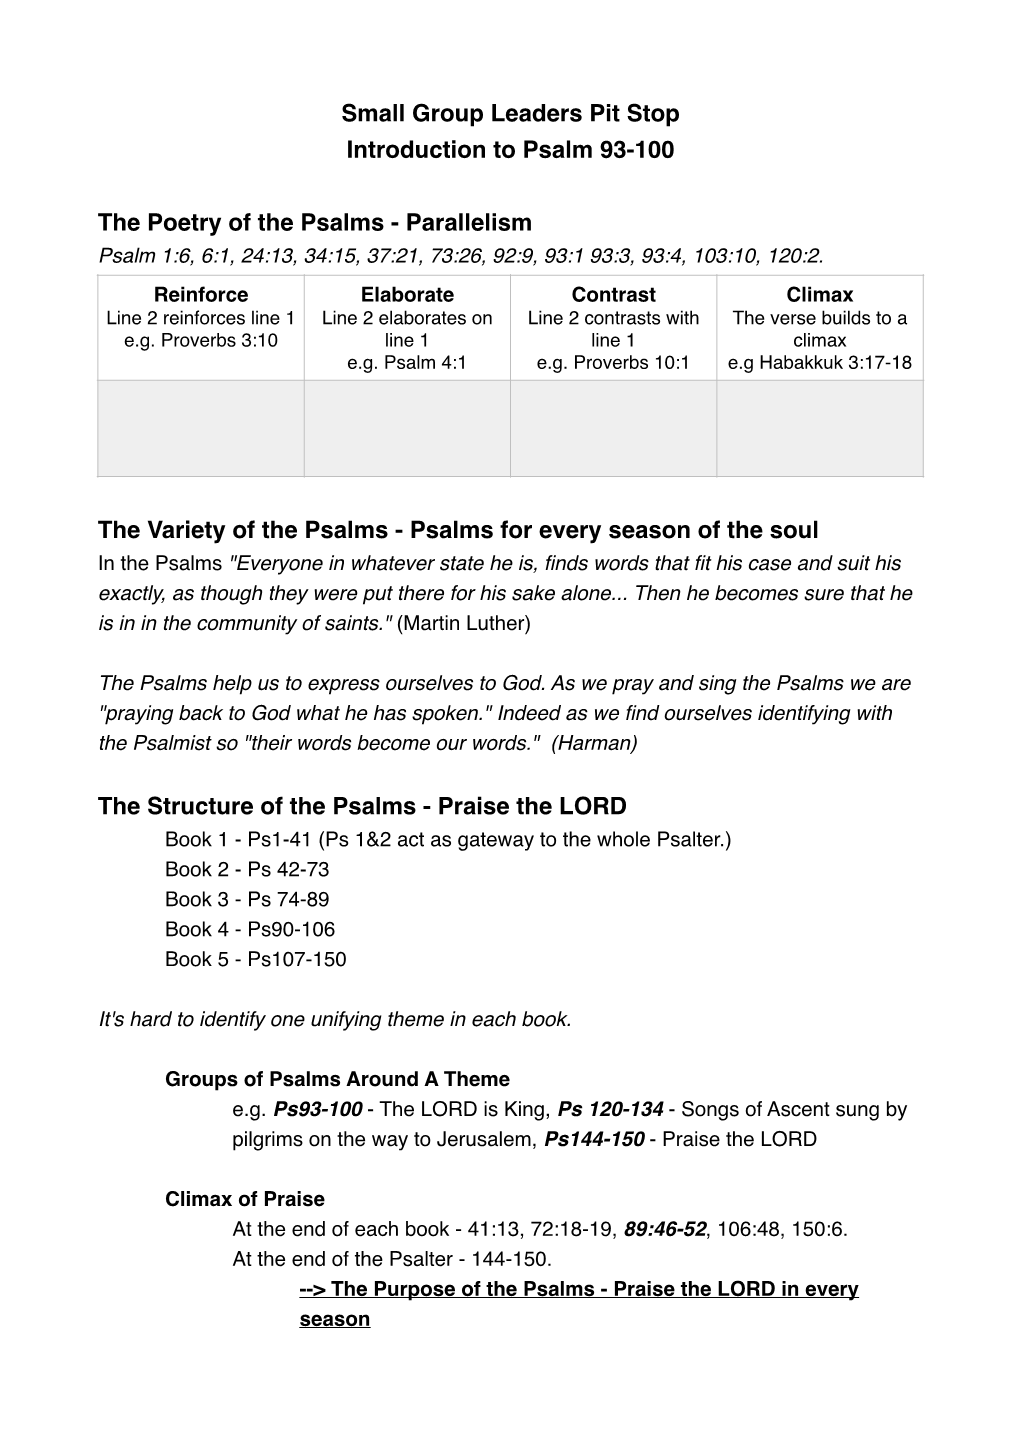 Complete Notes for Psalm 93-100